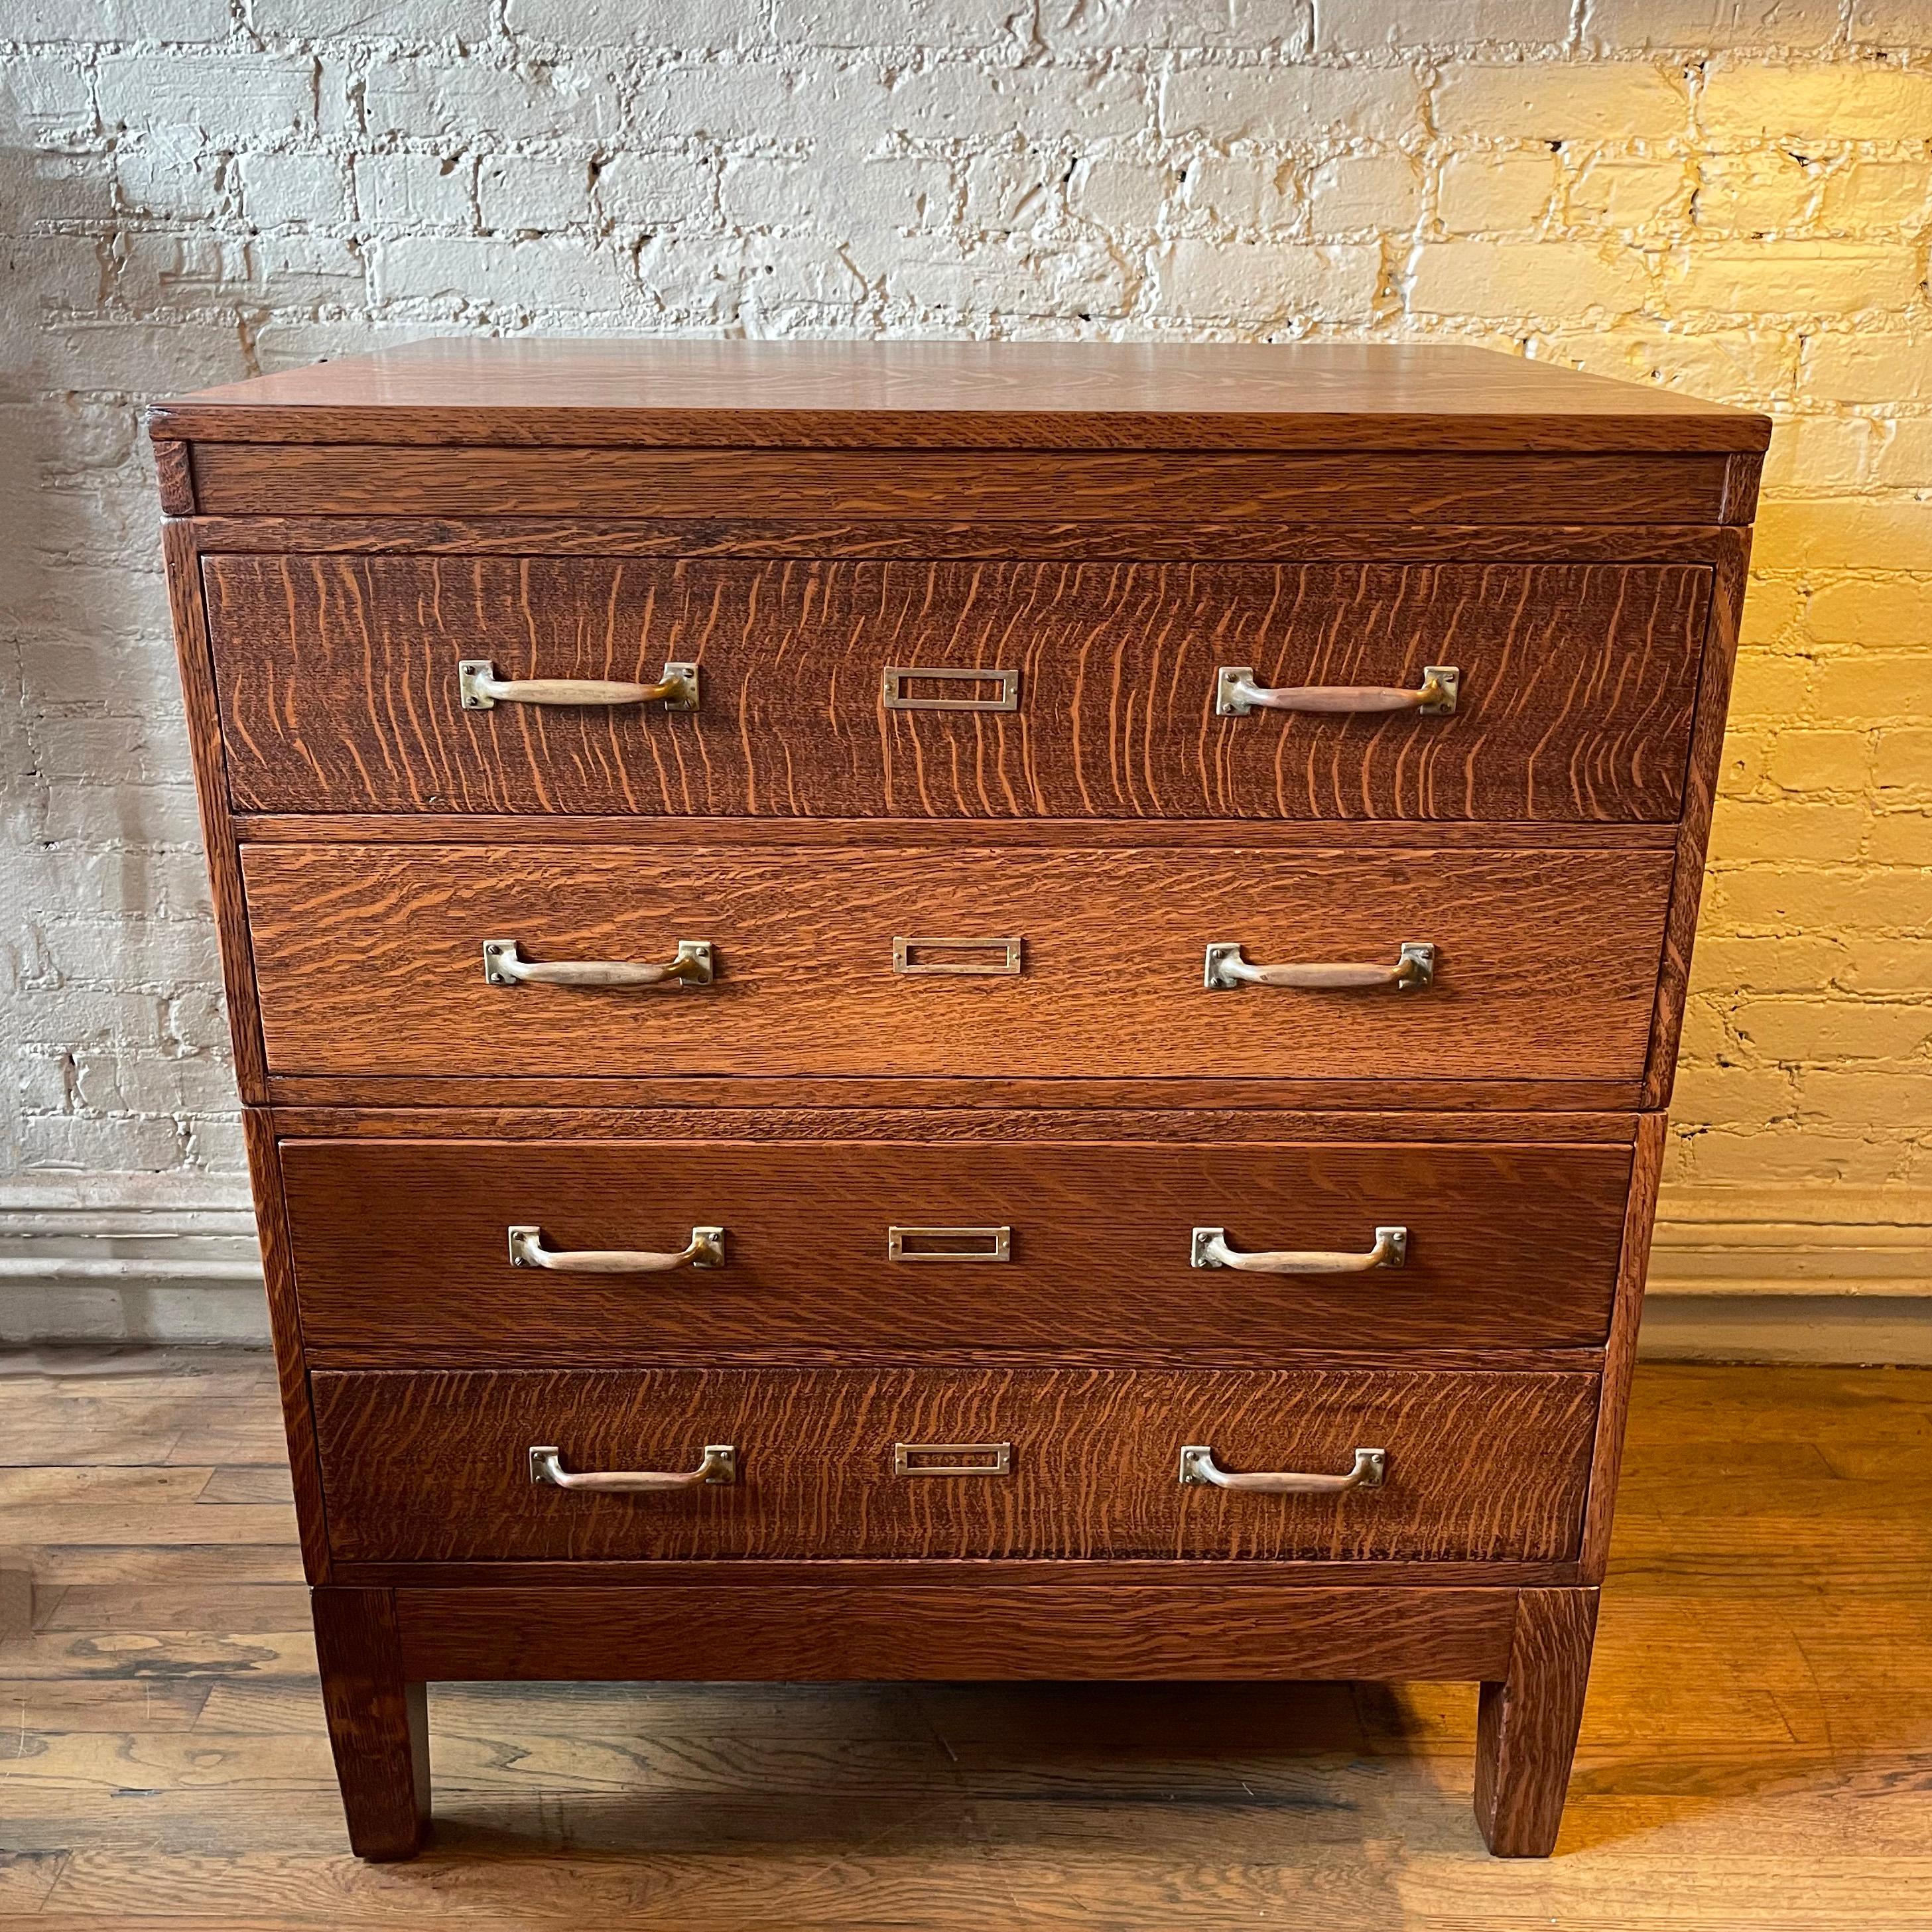 Handsome, early 20th century, industrial, tiger oak, modular, document cabinet by Library Bureau Makers features four drawers at 5.5 inches height each with brass plates and handles.